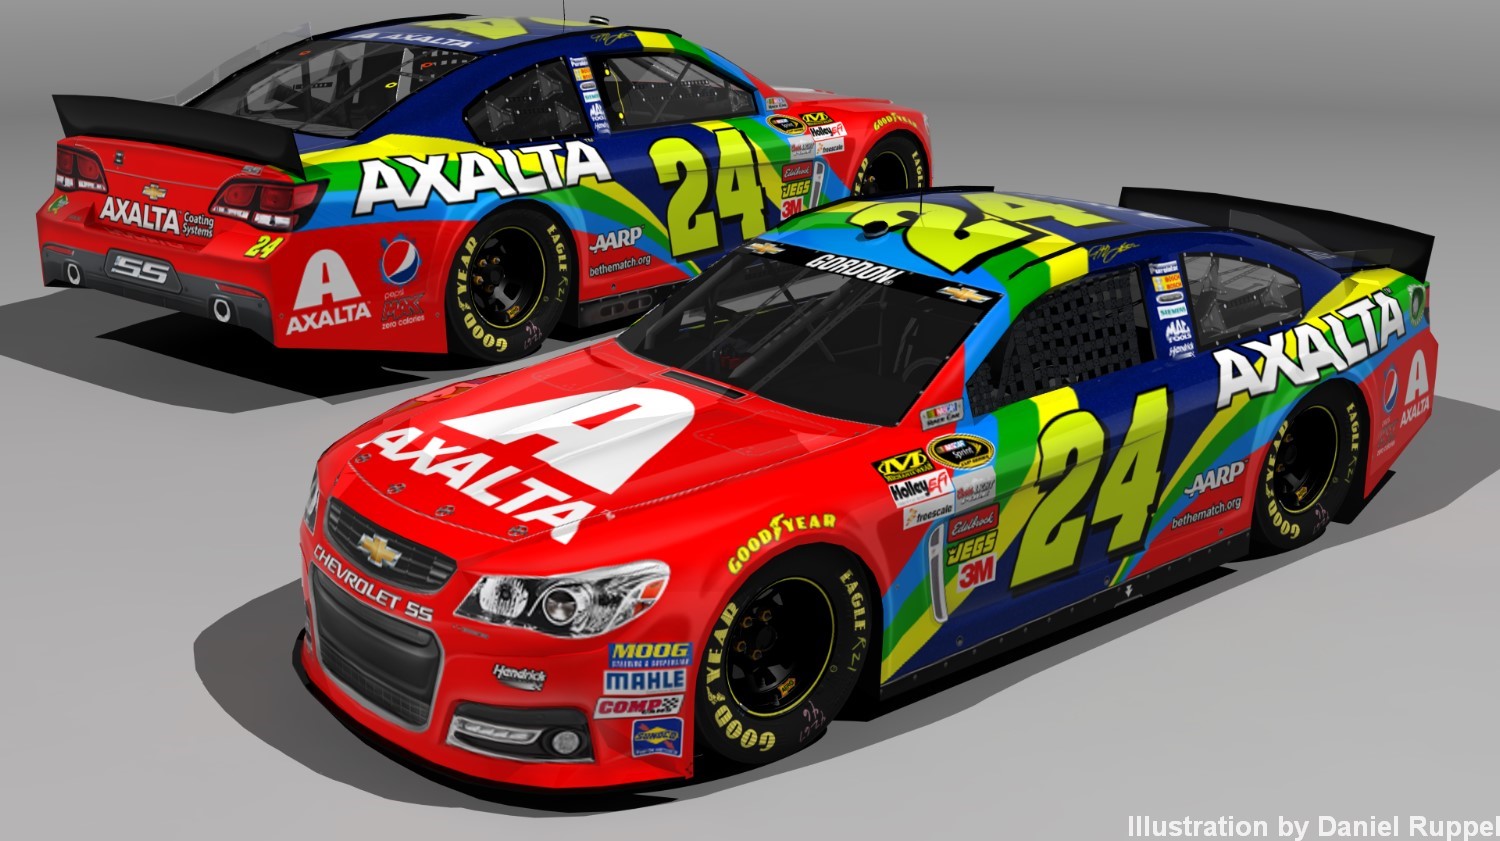 Axalta was a Jeff Gordon sponsor for a number of years